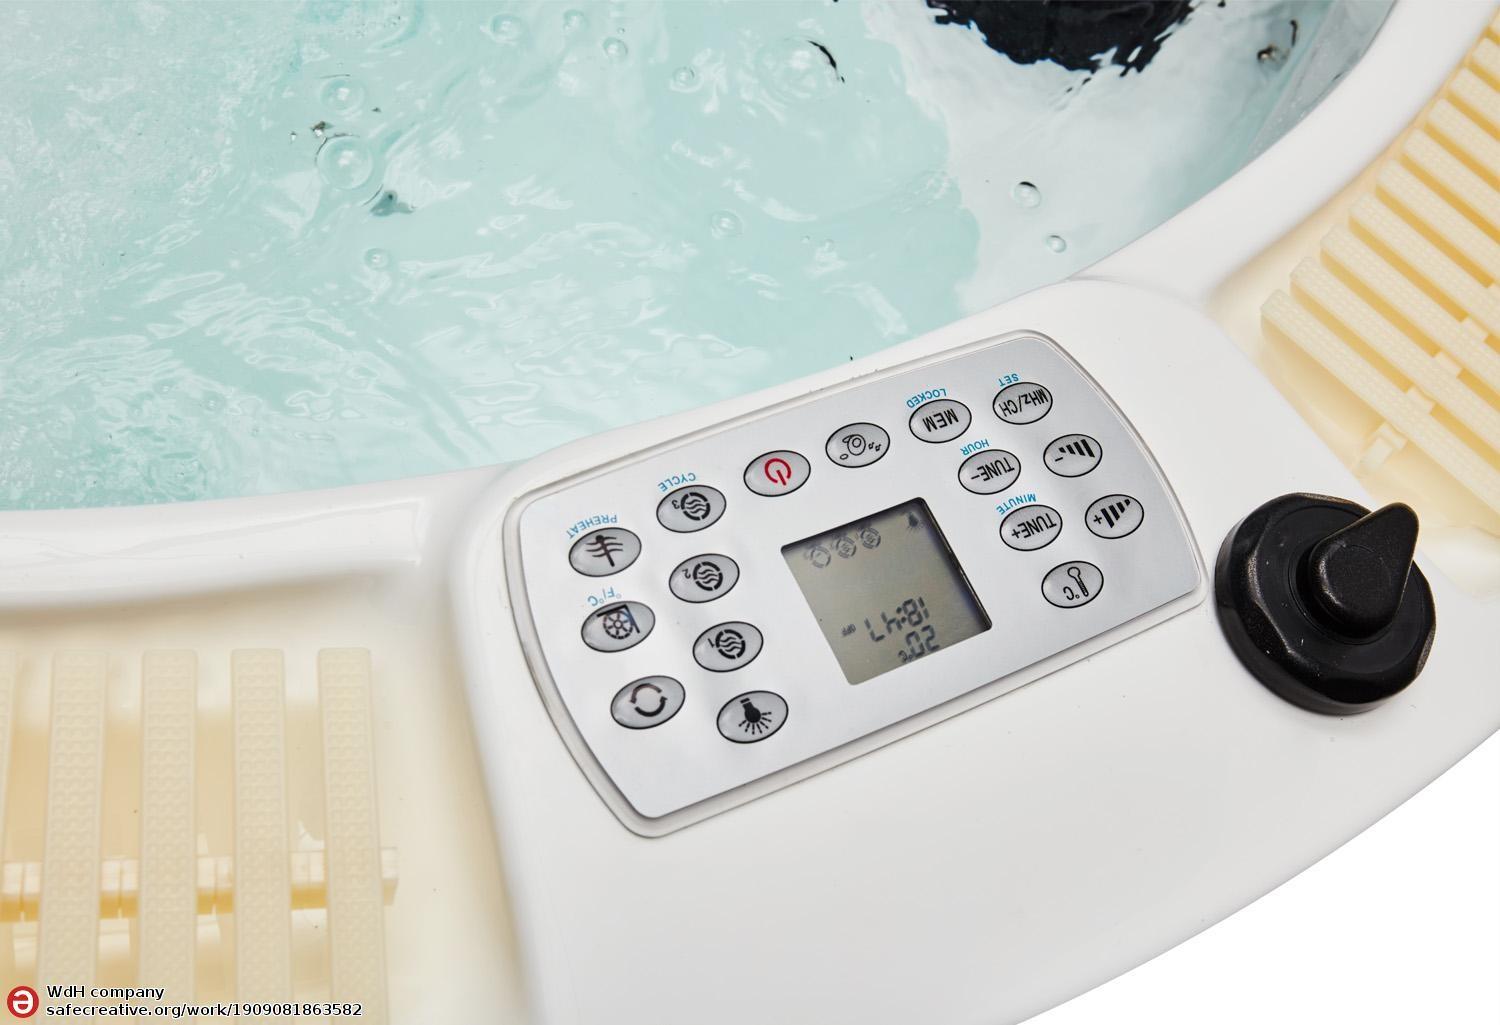 Spa jacuzzi exterior AS-005